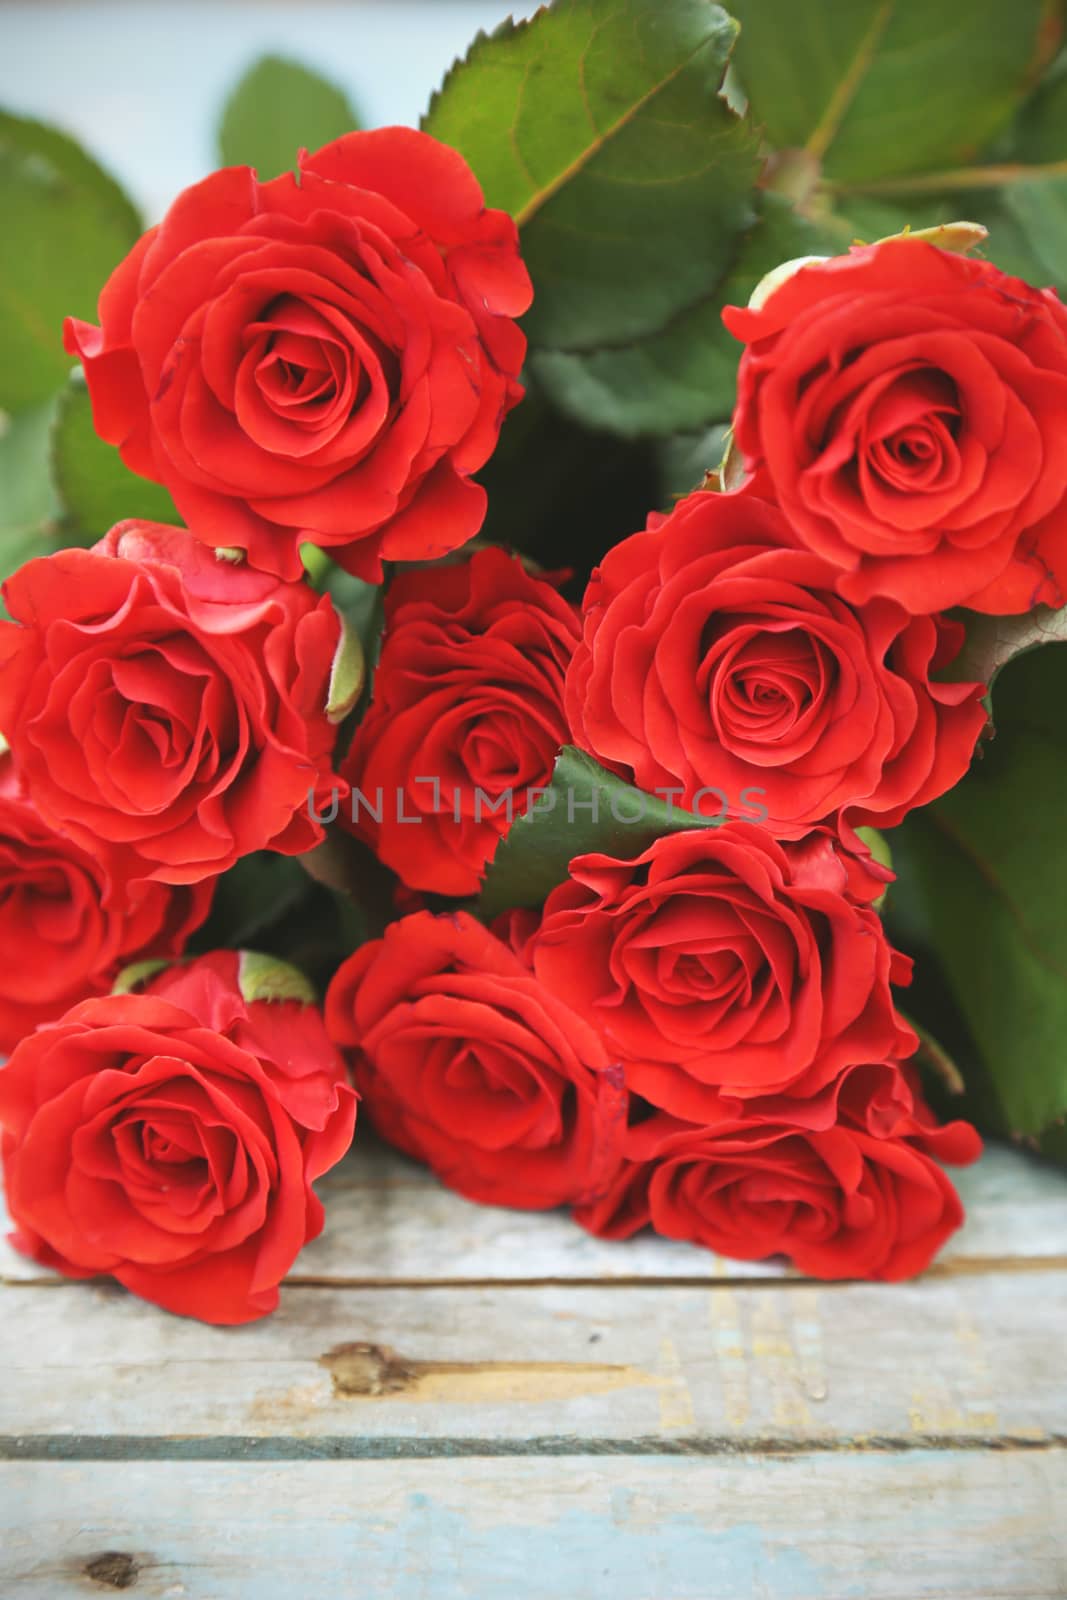 beautyful fresh red roses on wooden background